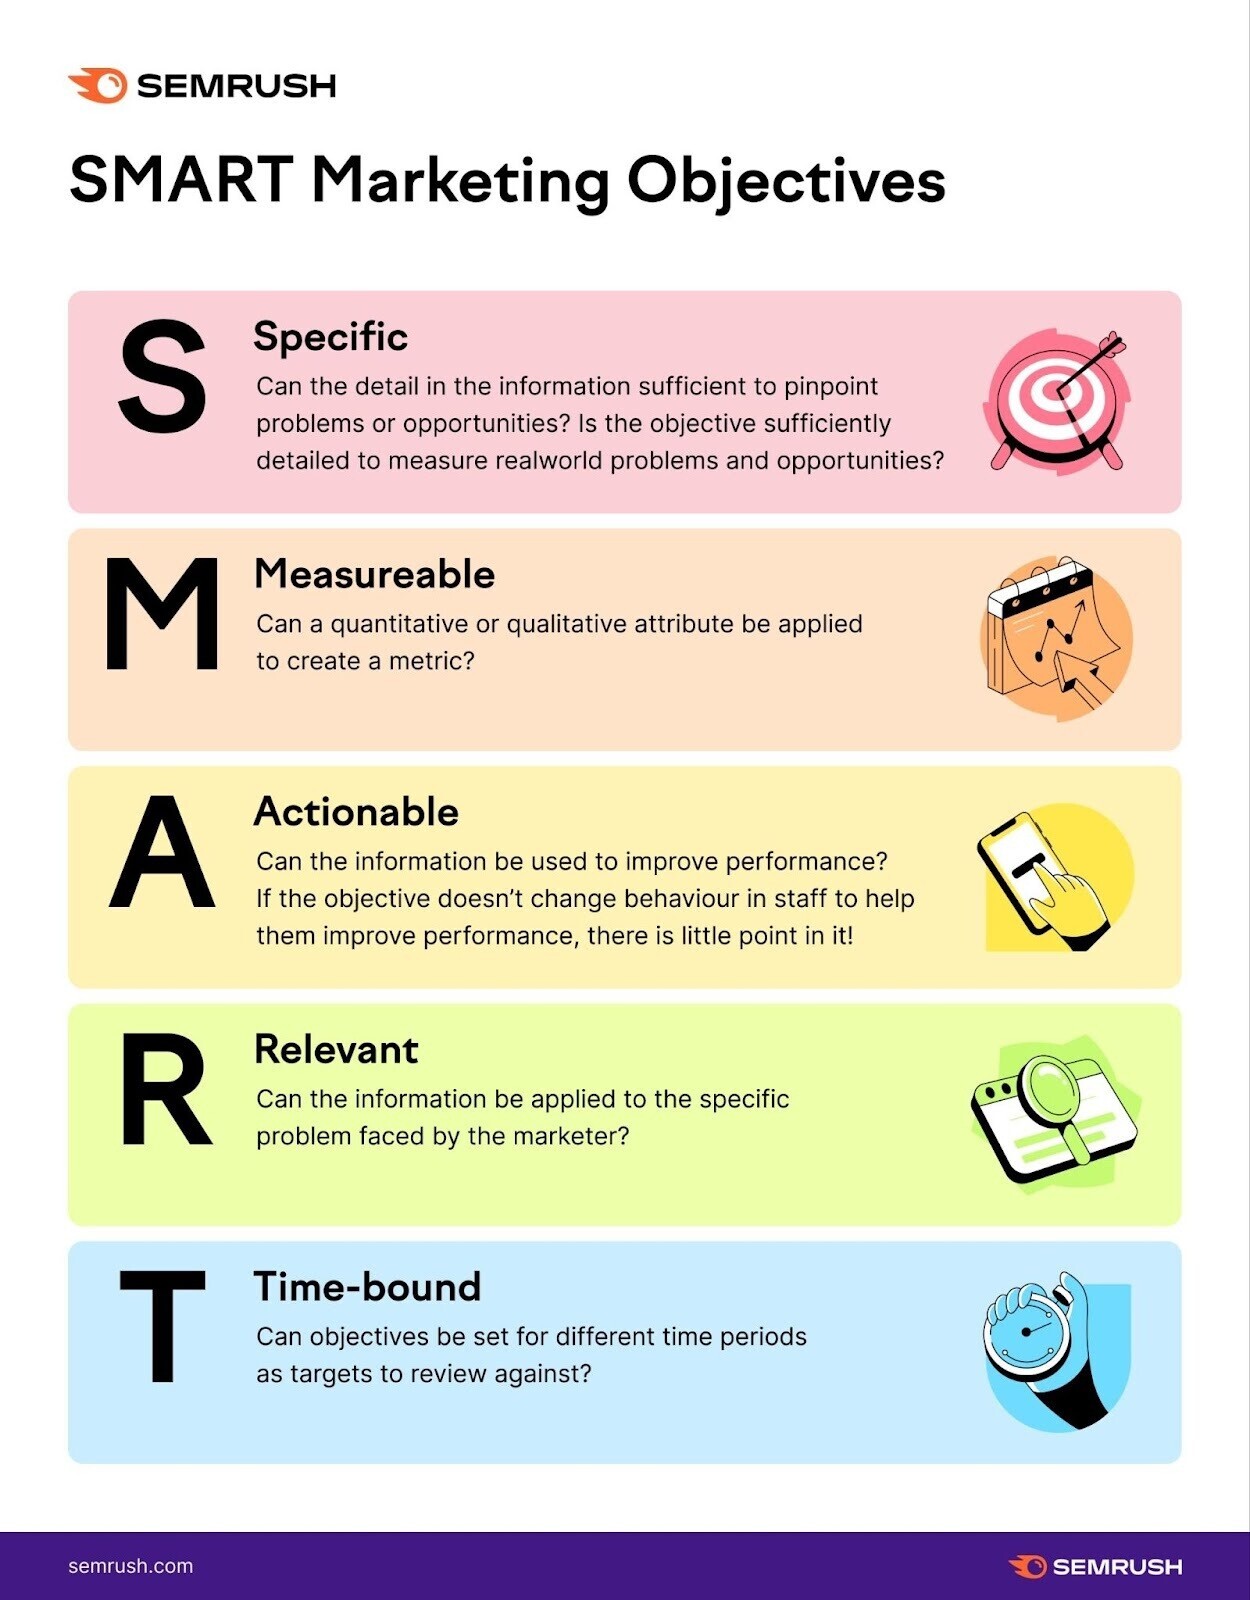 A visual explaining what SMART marketing objectives are